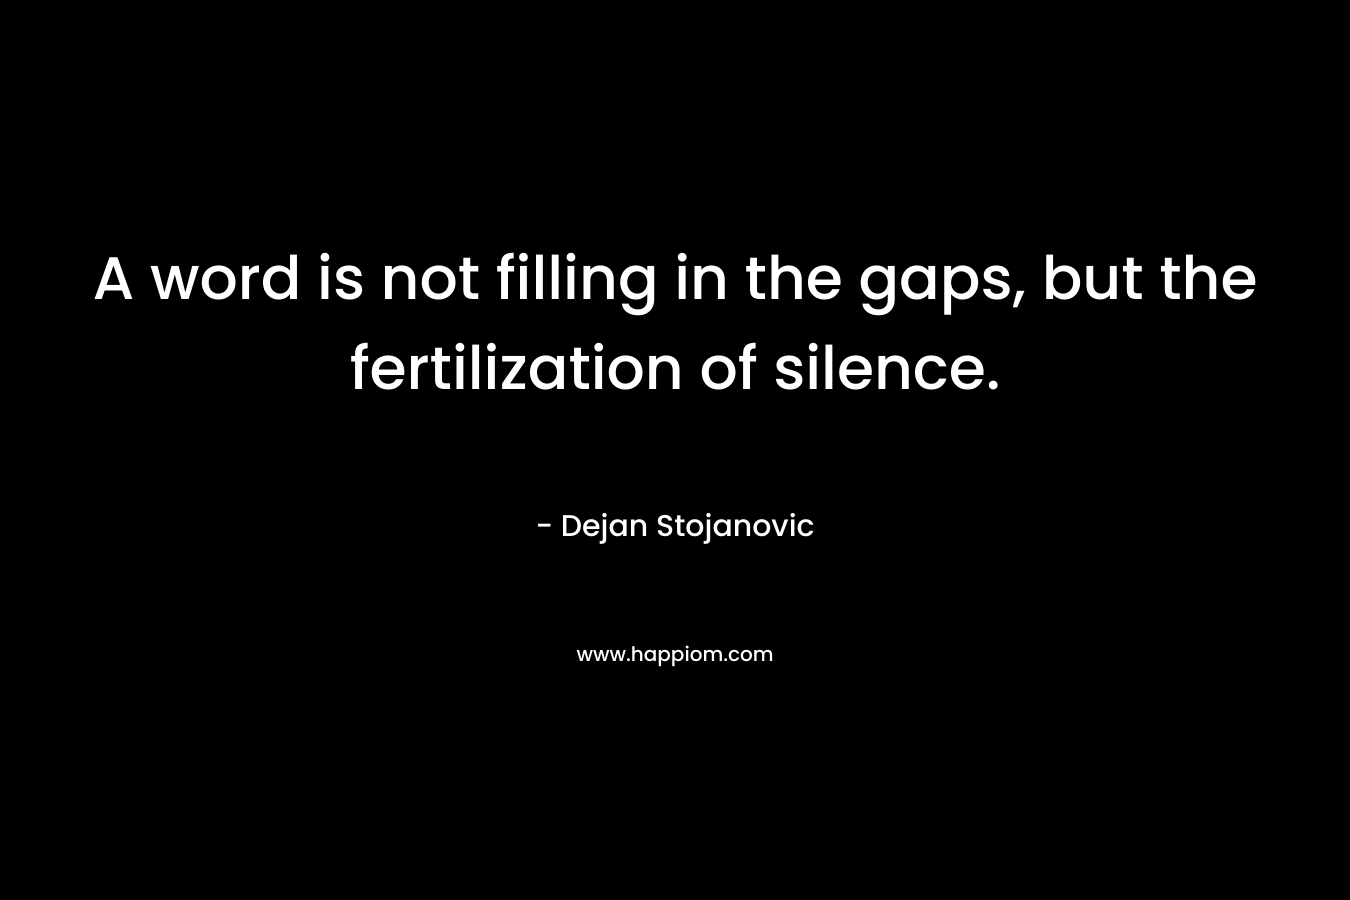 A word is not filling in the gaps, but the fertilization of silence. – Dejan Stojanovic